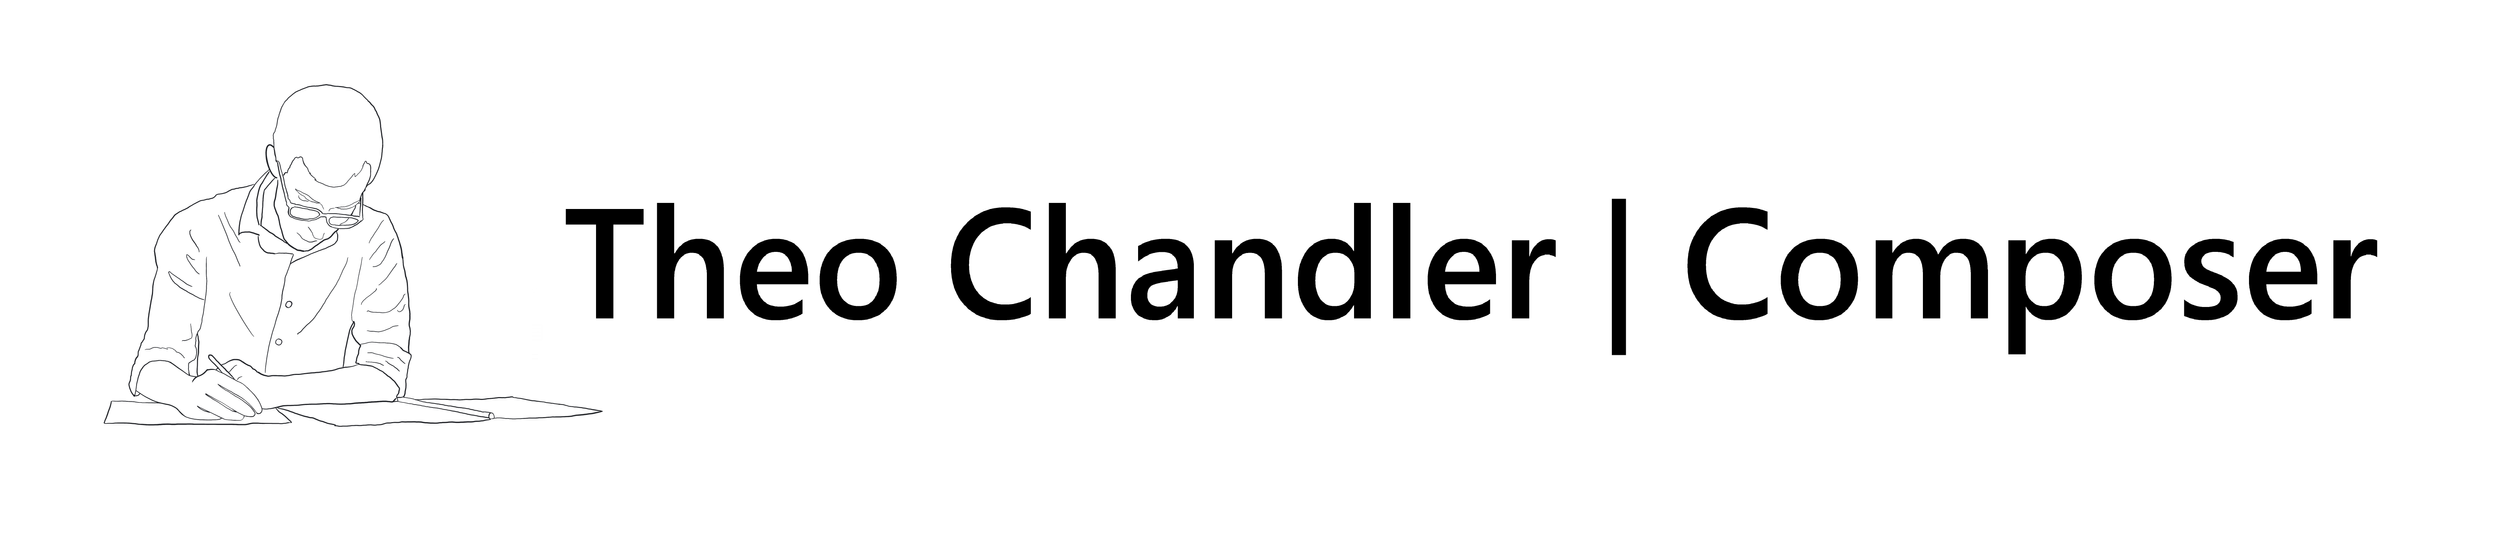 Theo Chandler | Composer